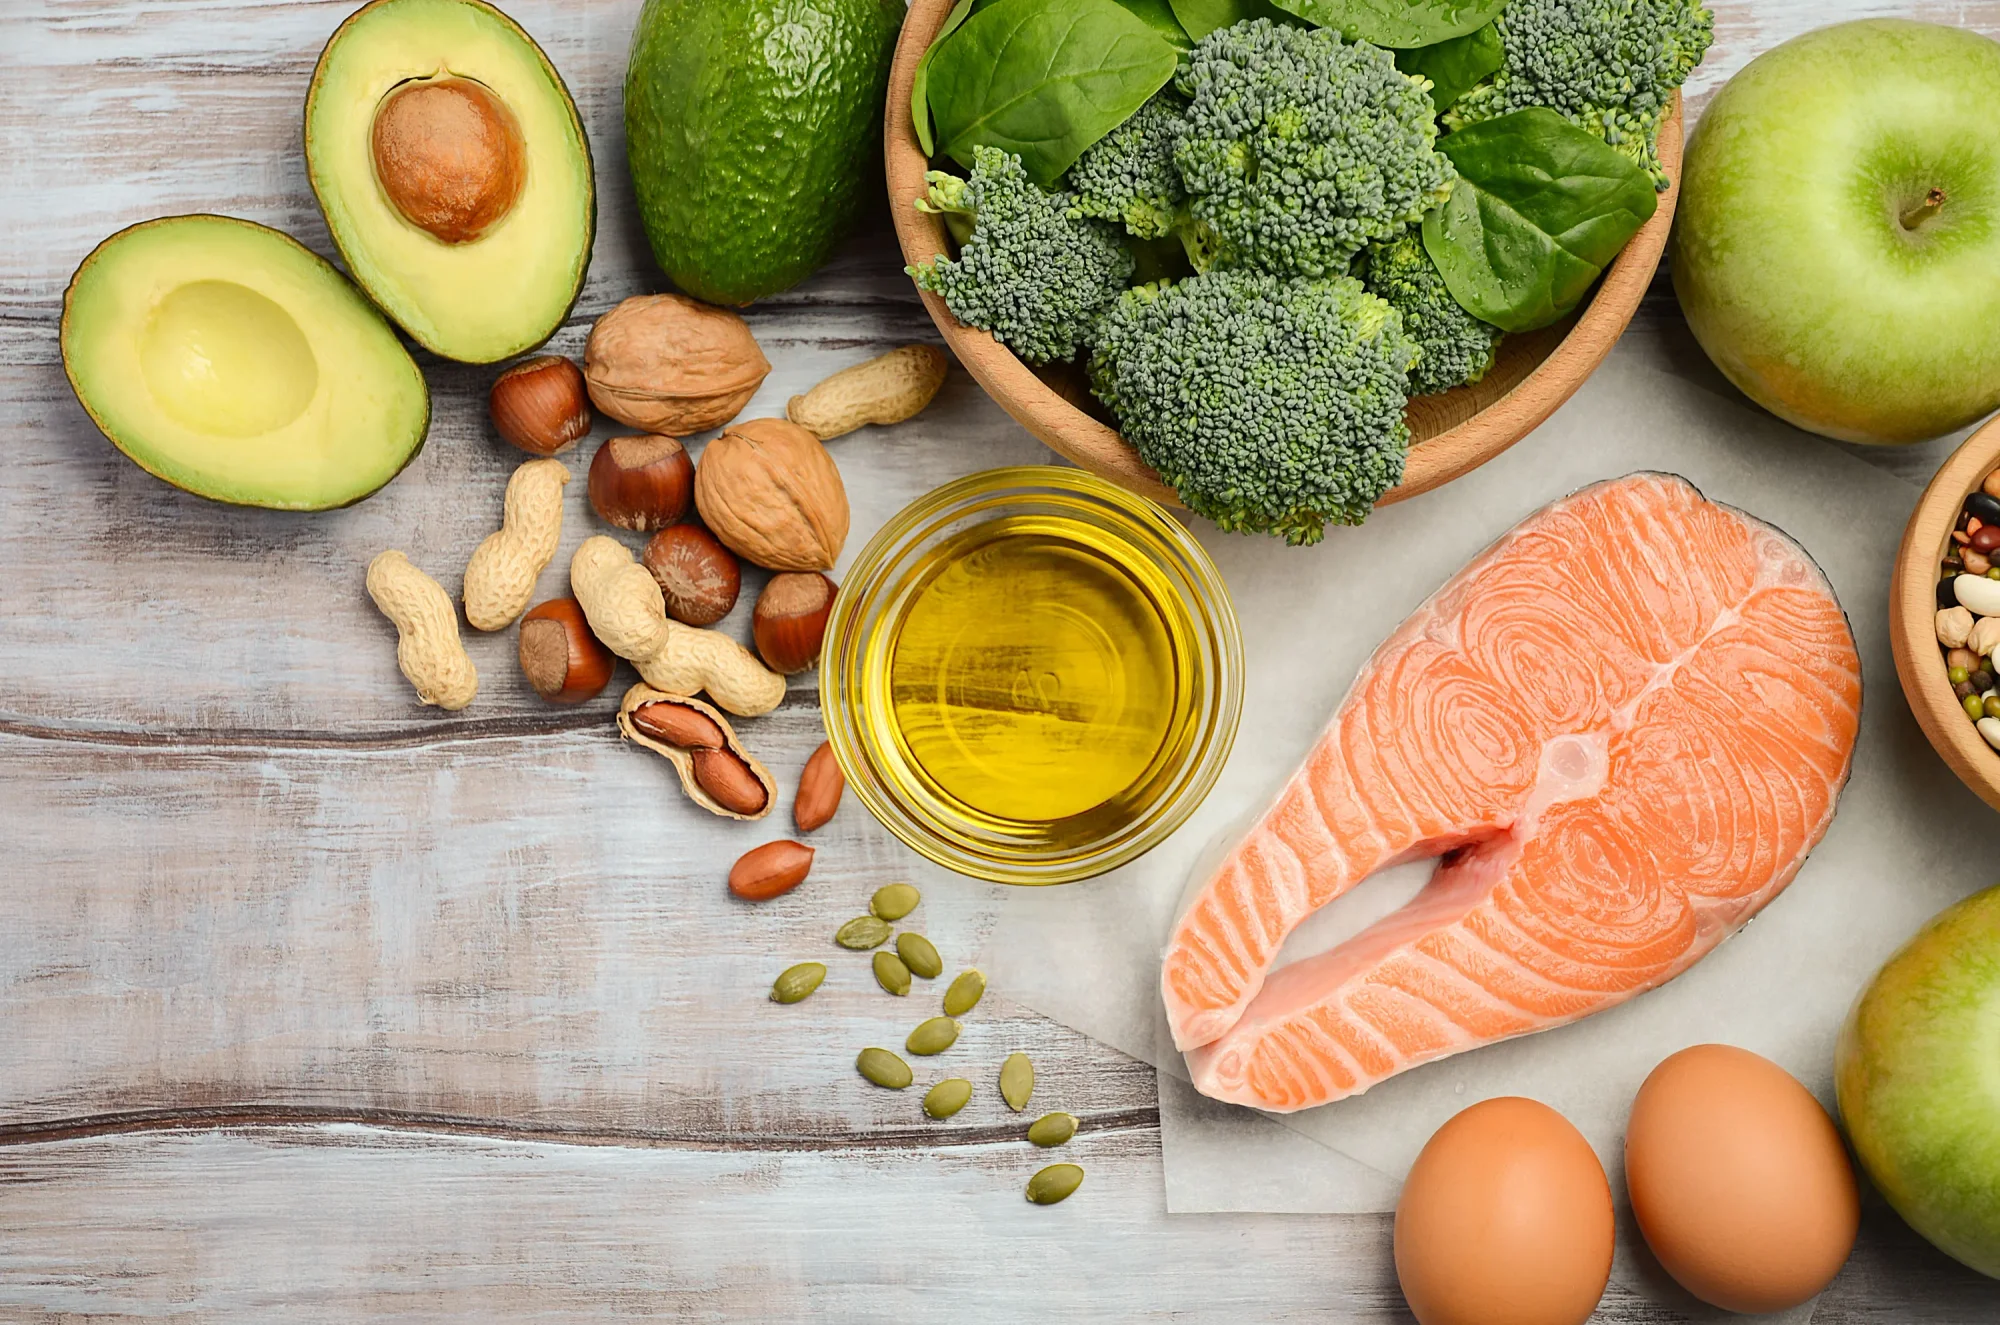 Selection of whole foods with omega-3s: salmon, eggs, nuts, seeds, avocado, olive oil.